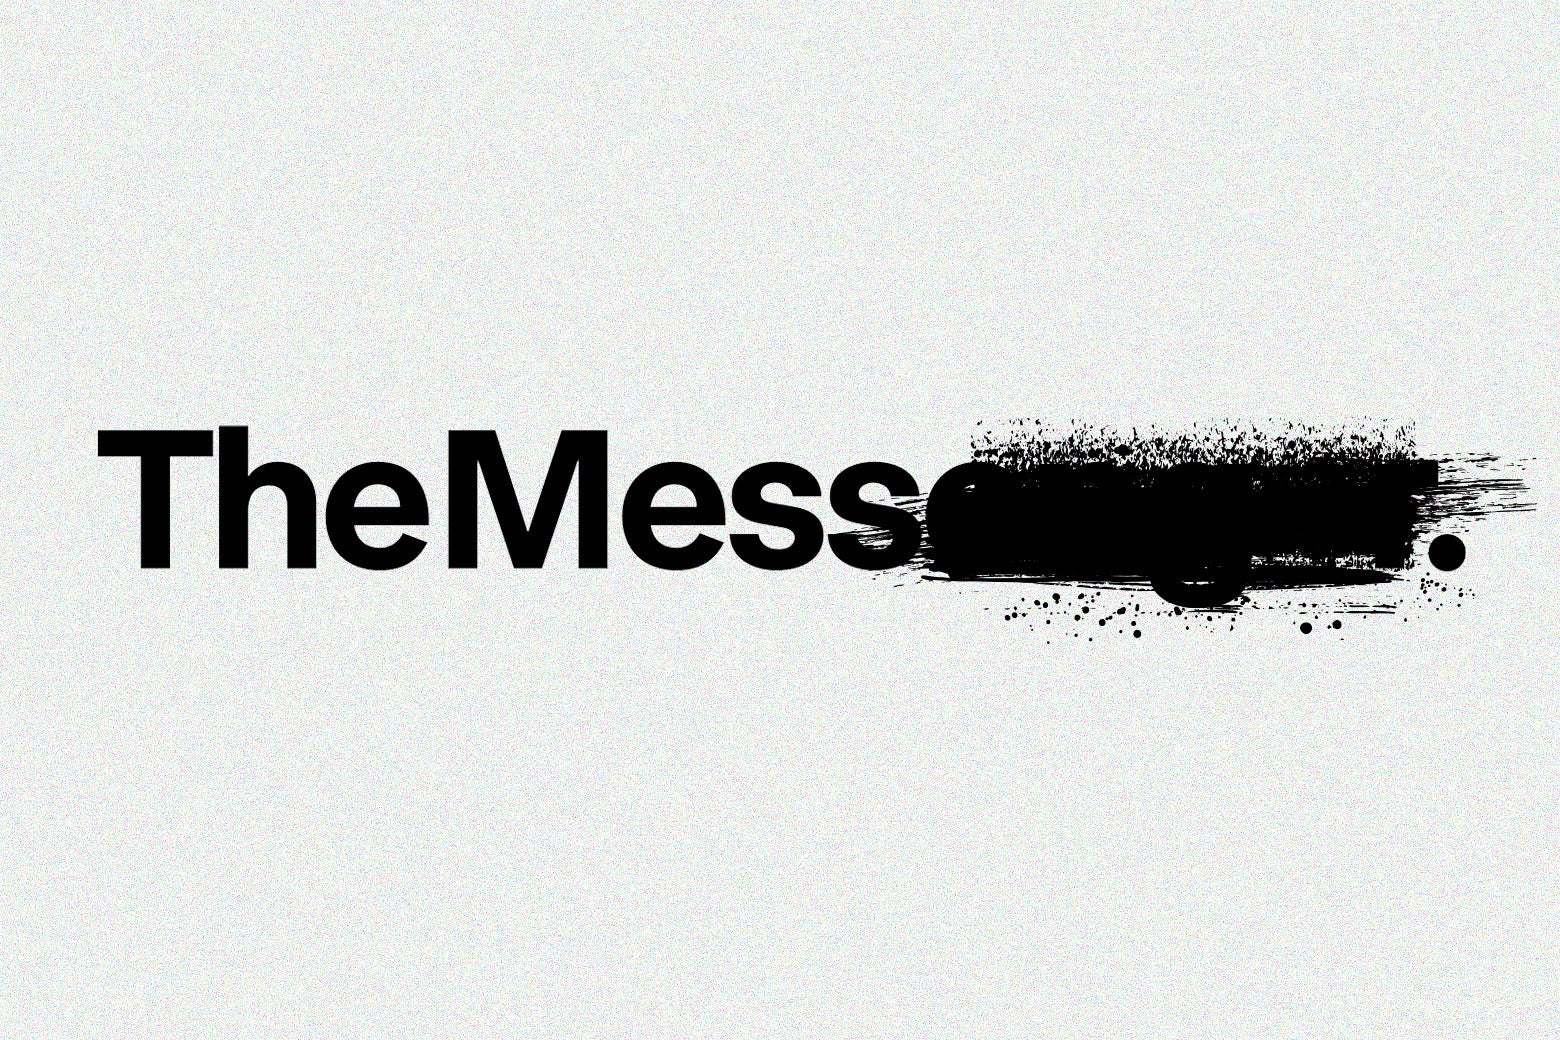 The logo for The Messenger with part of it obscured with a black smear so it reads "The Mess."